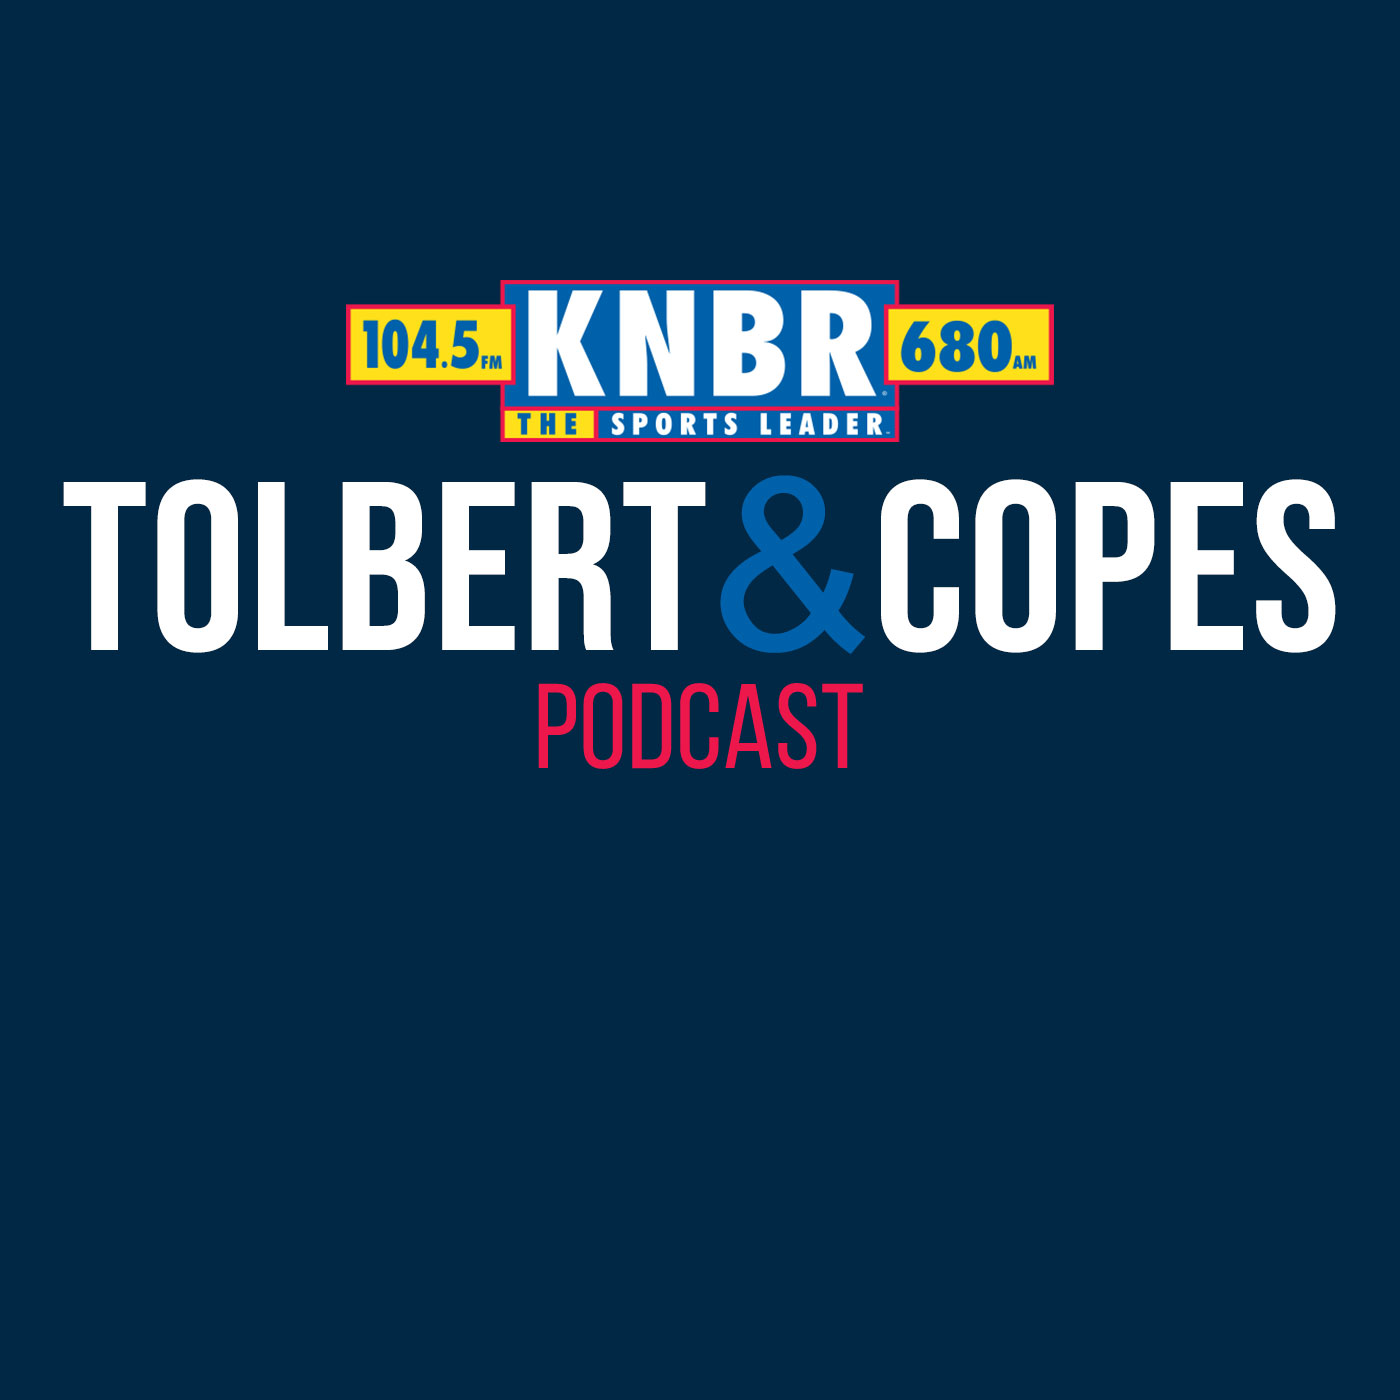 7-1 Tolbert & Copes Hour 2: What's Next for the Warriors After Striking Out on Paul George?